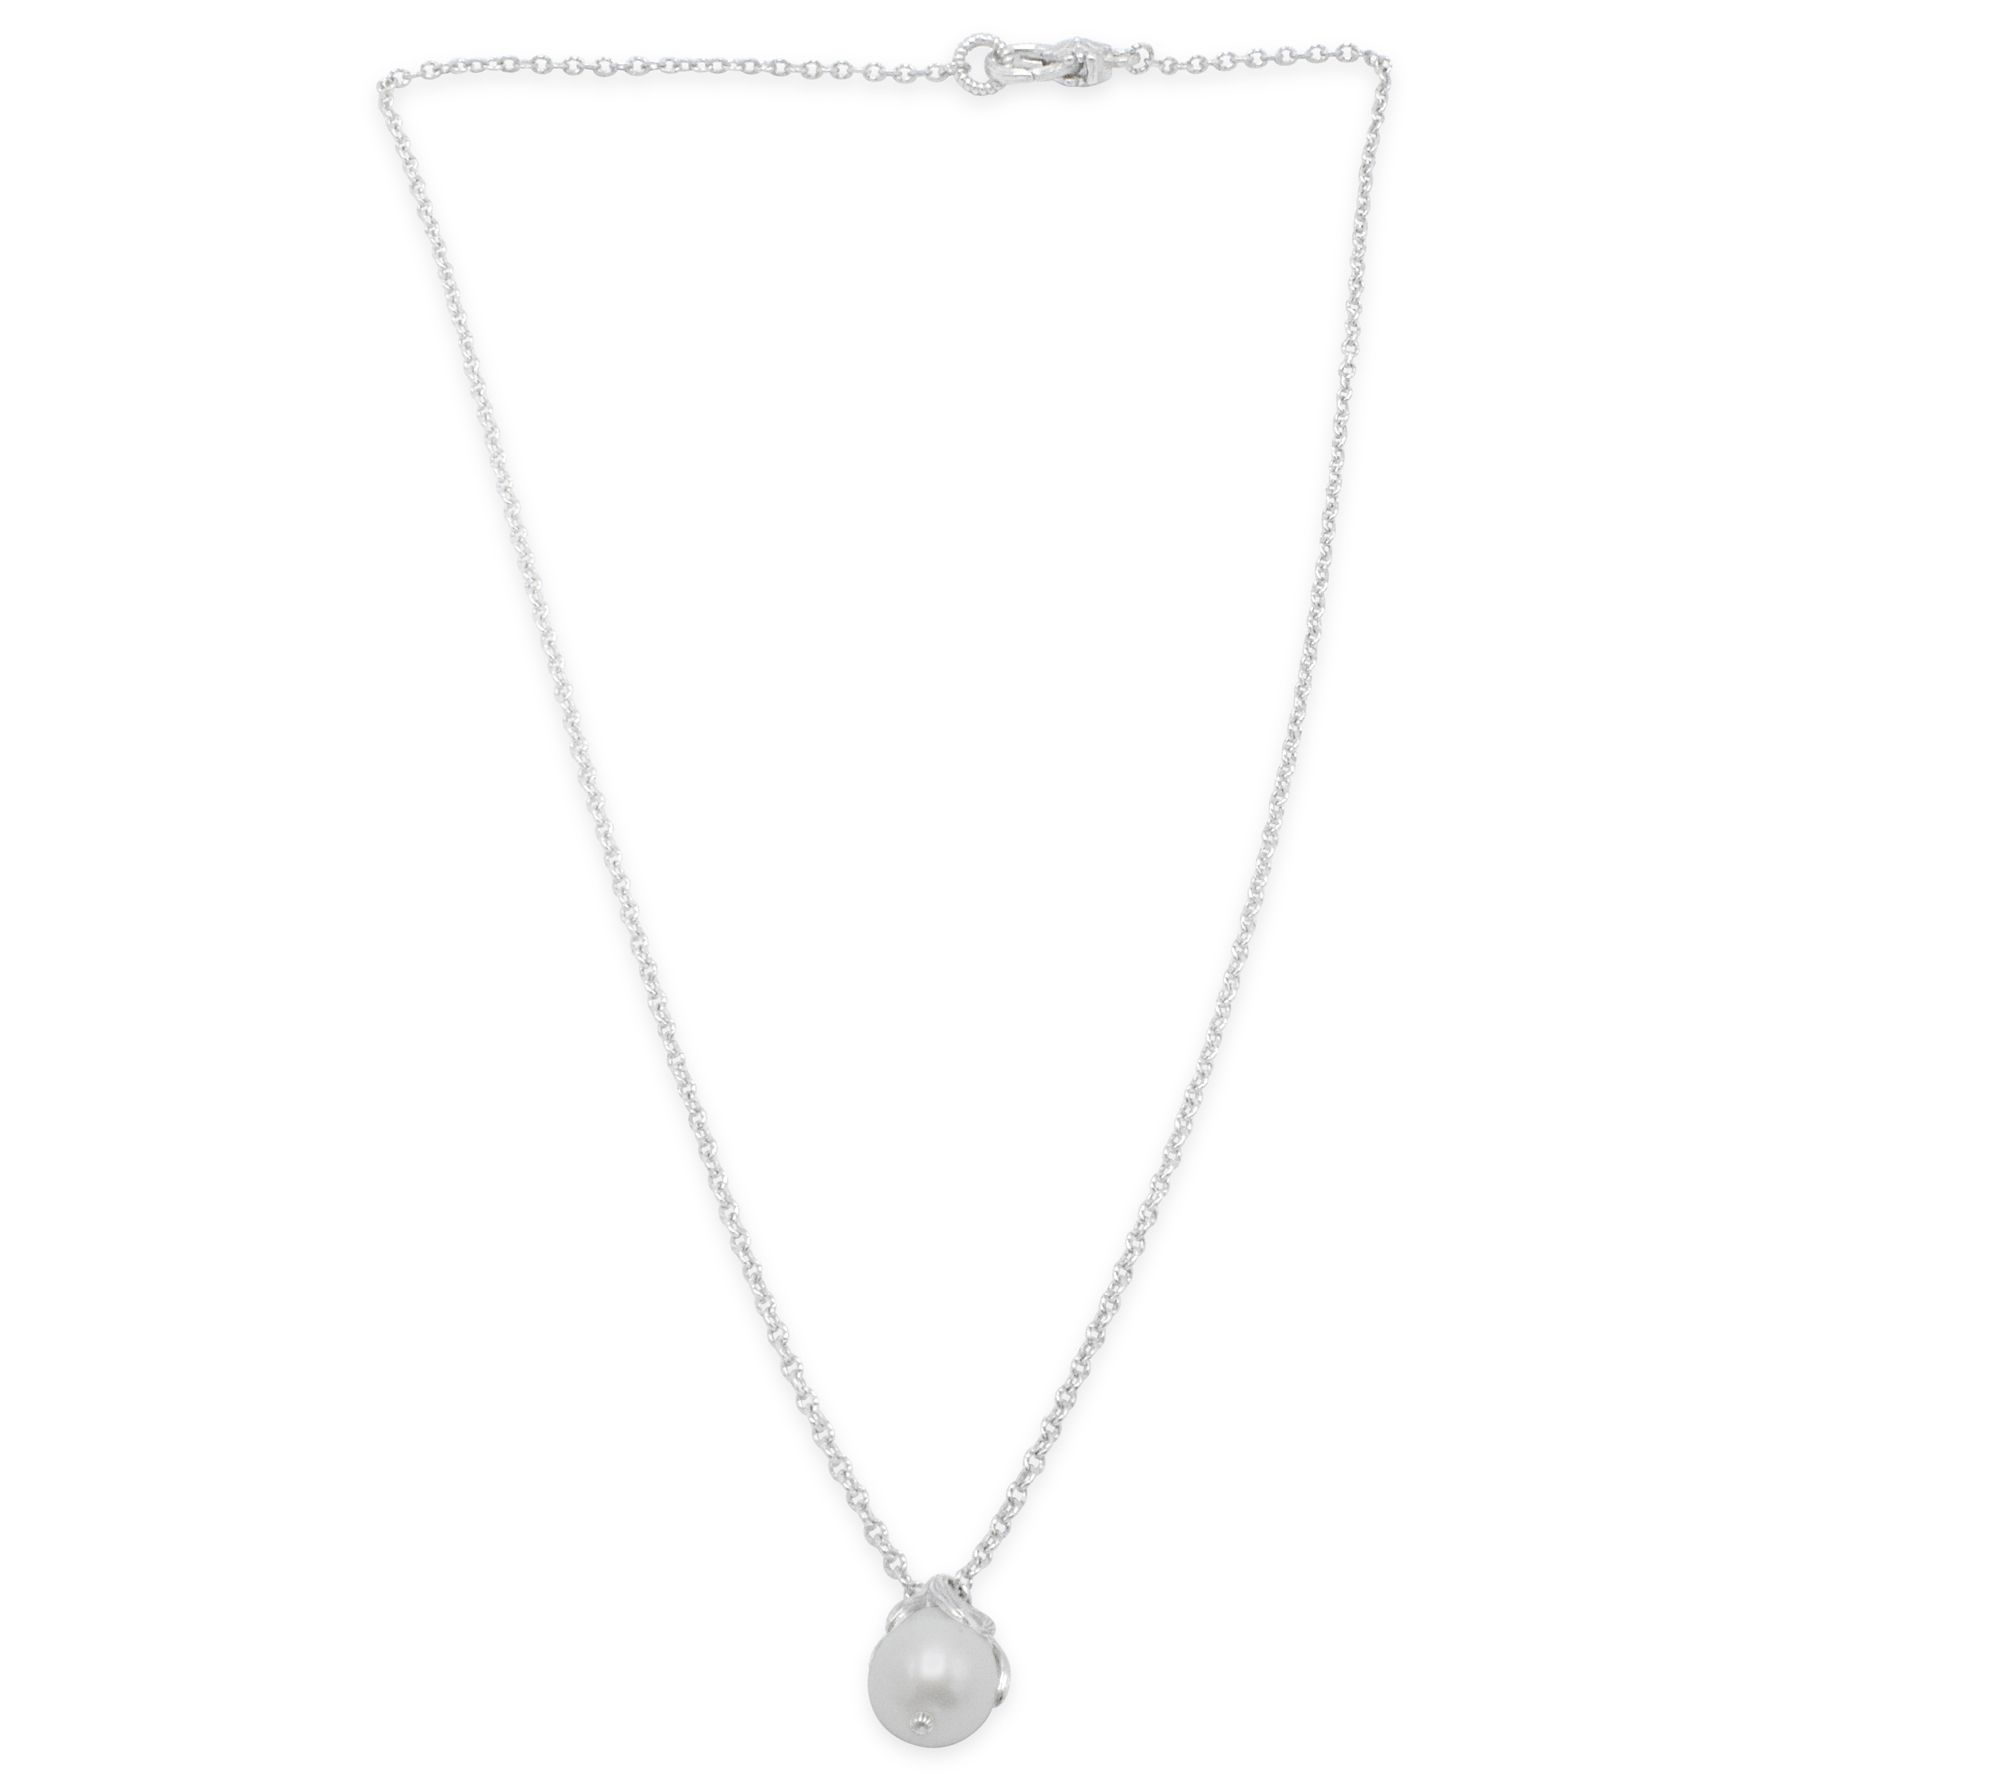 Ariva Sterling Silver Cultured Pearl Pendant with Chain - QVC.com